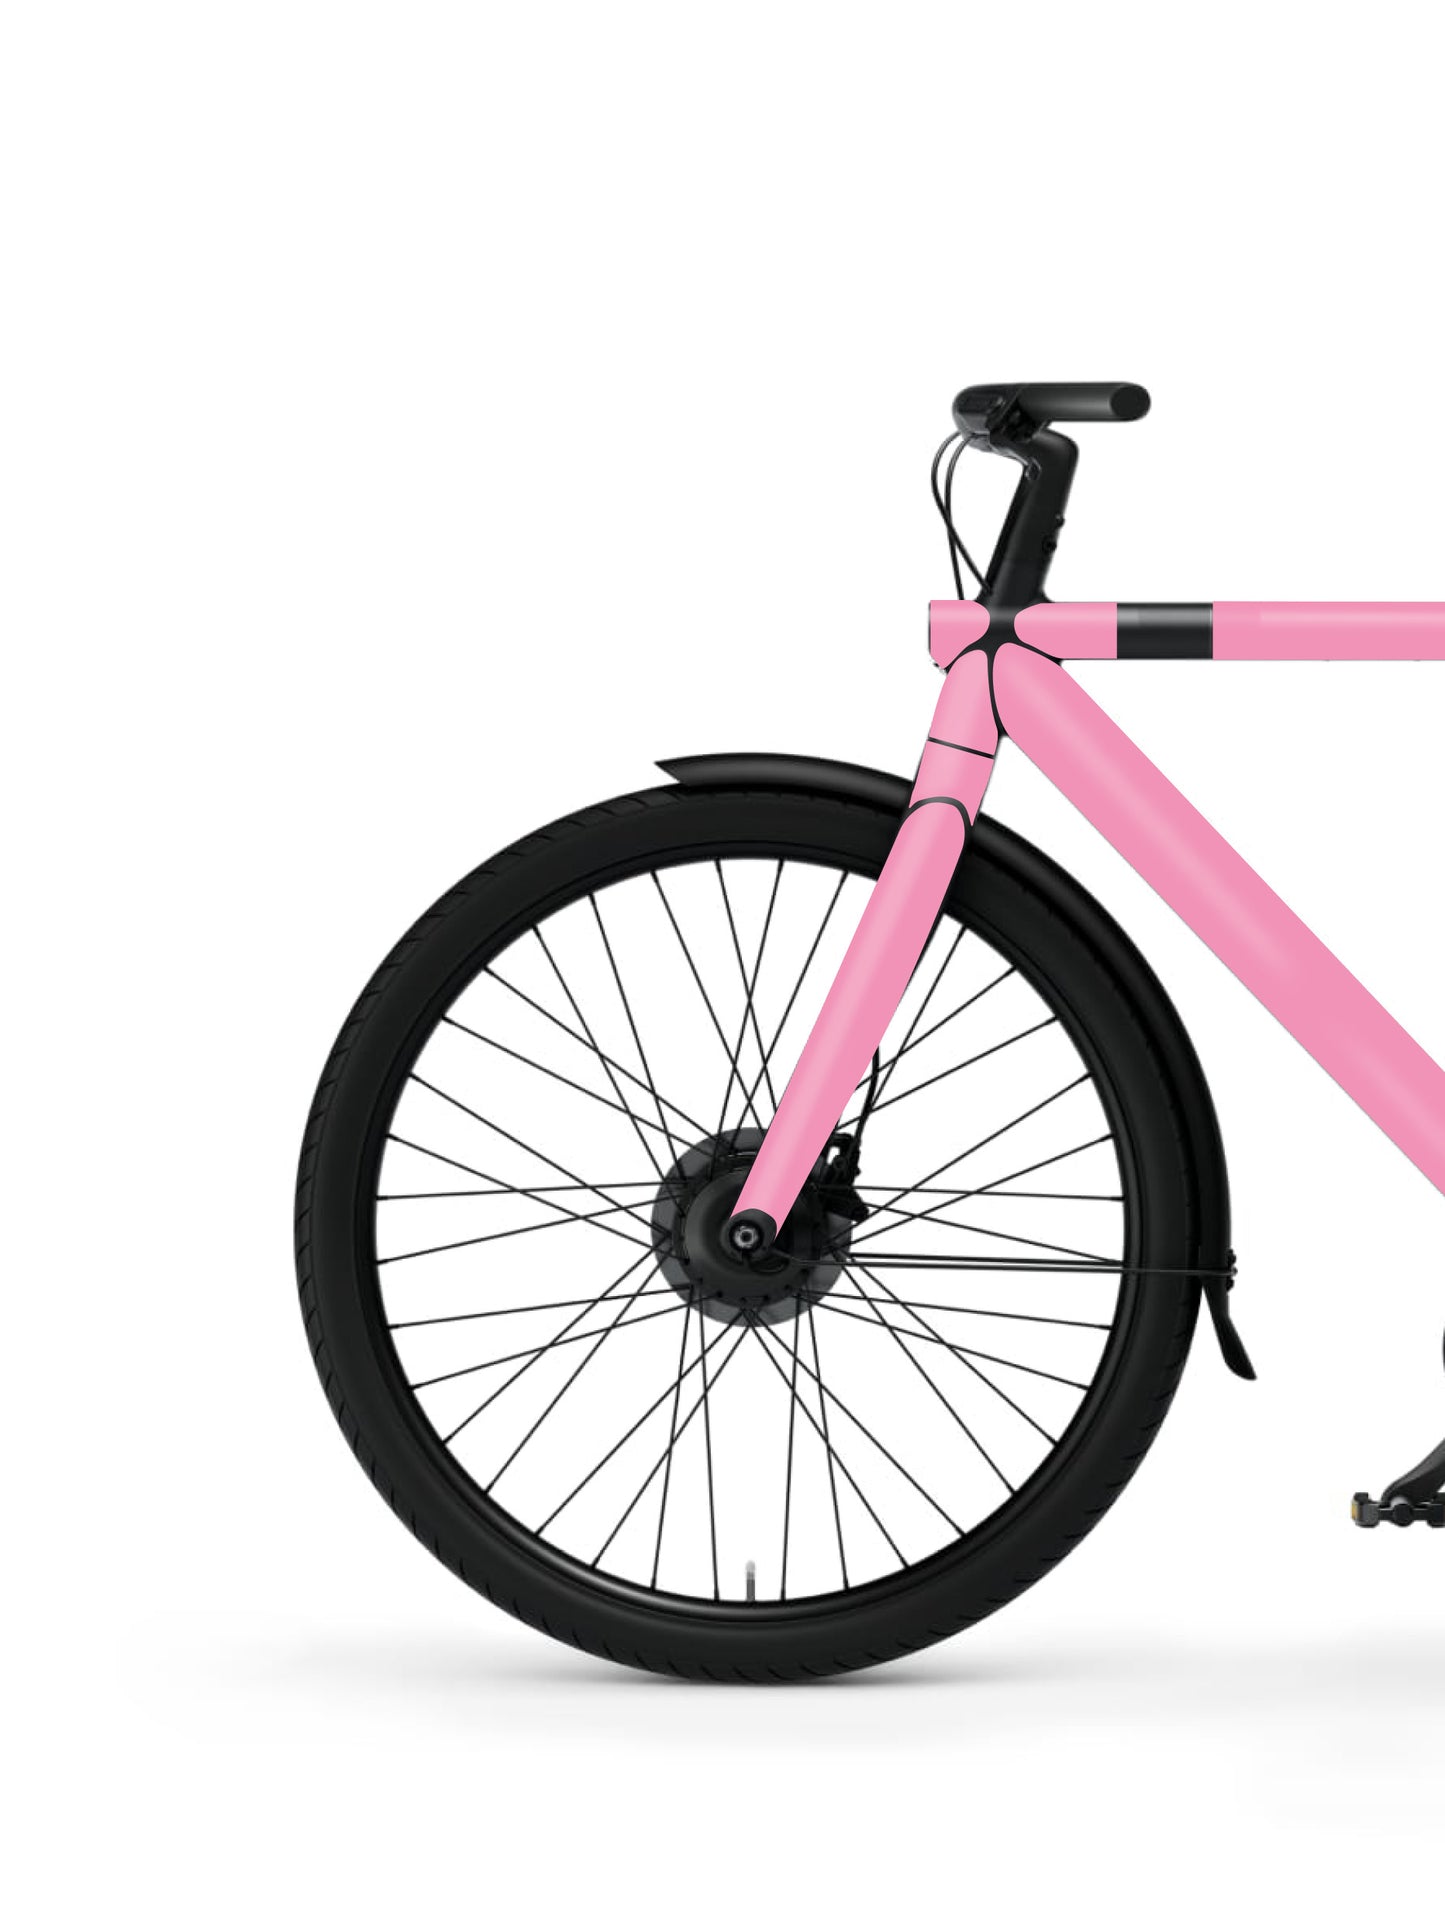 PINK PROTECT KIT FOR VANMOOF S2/S3